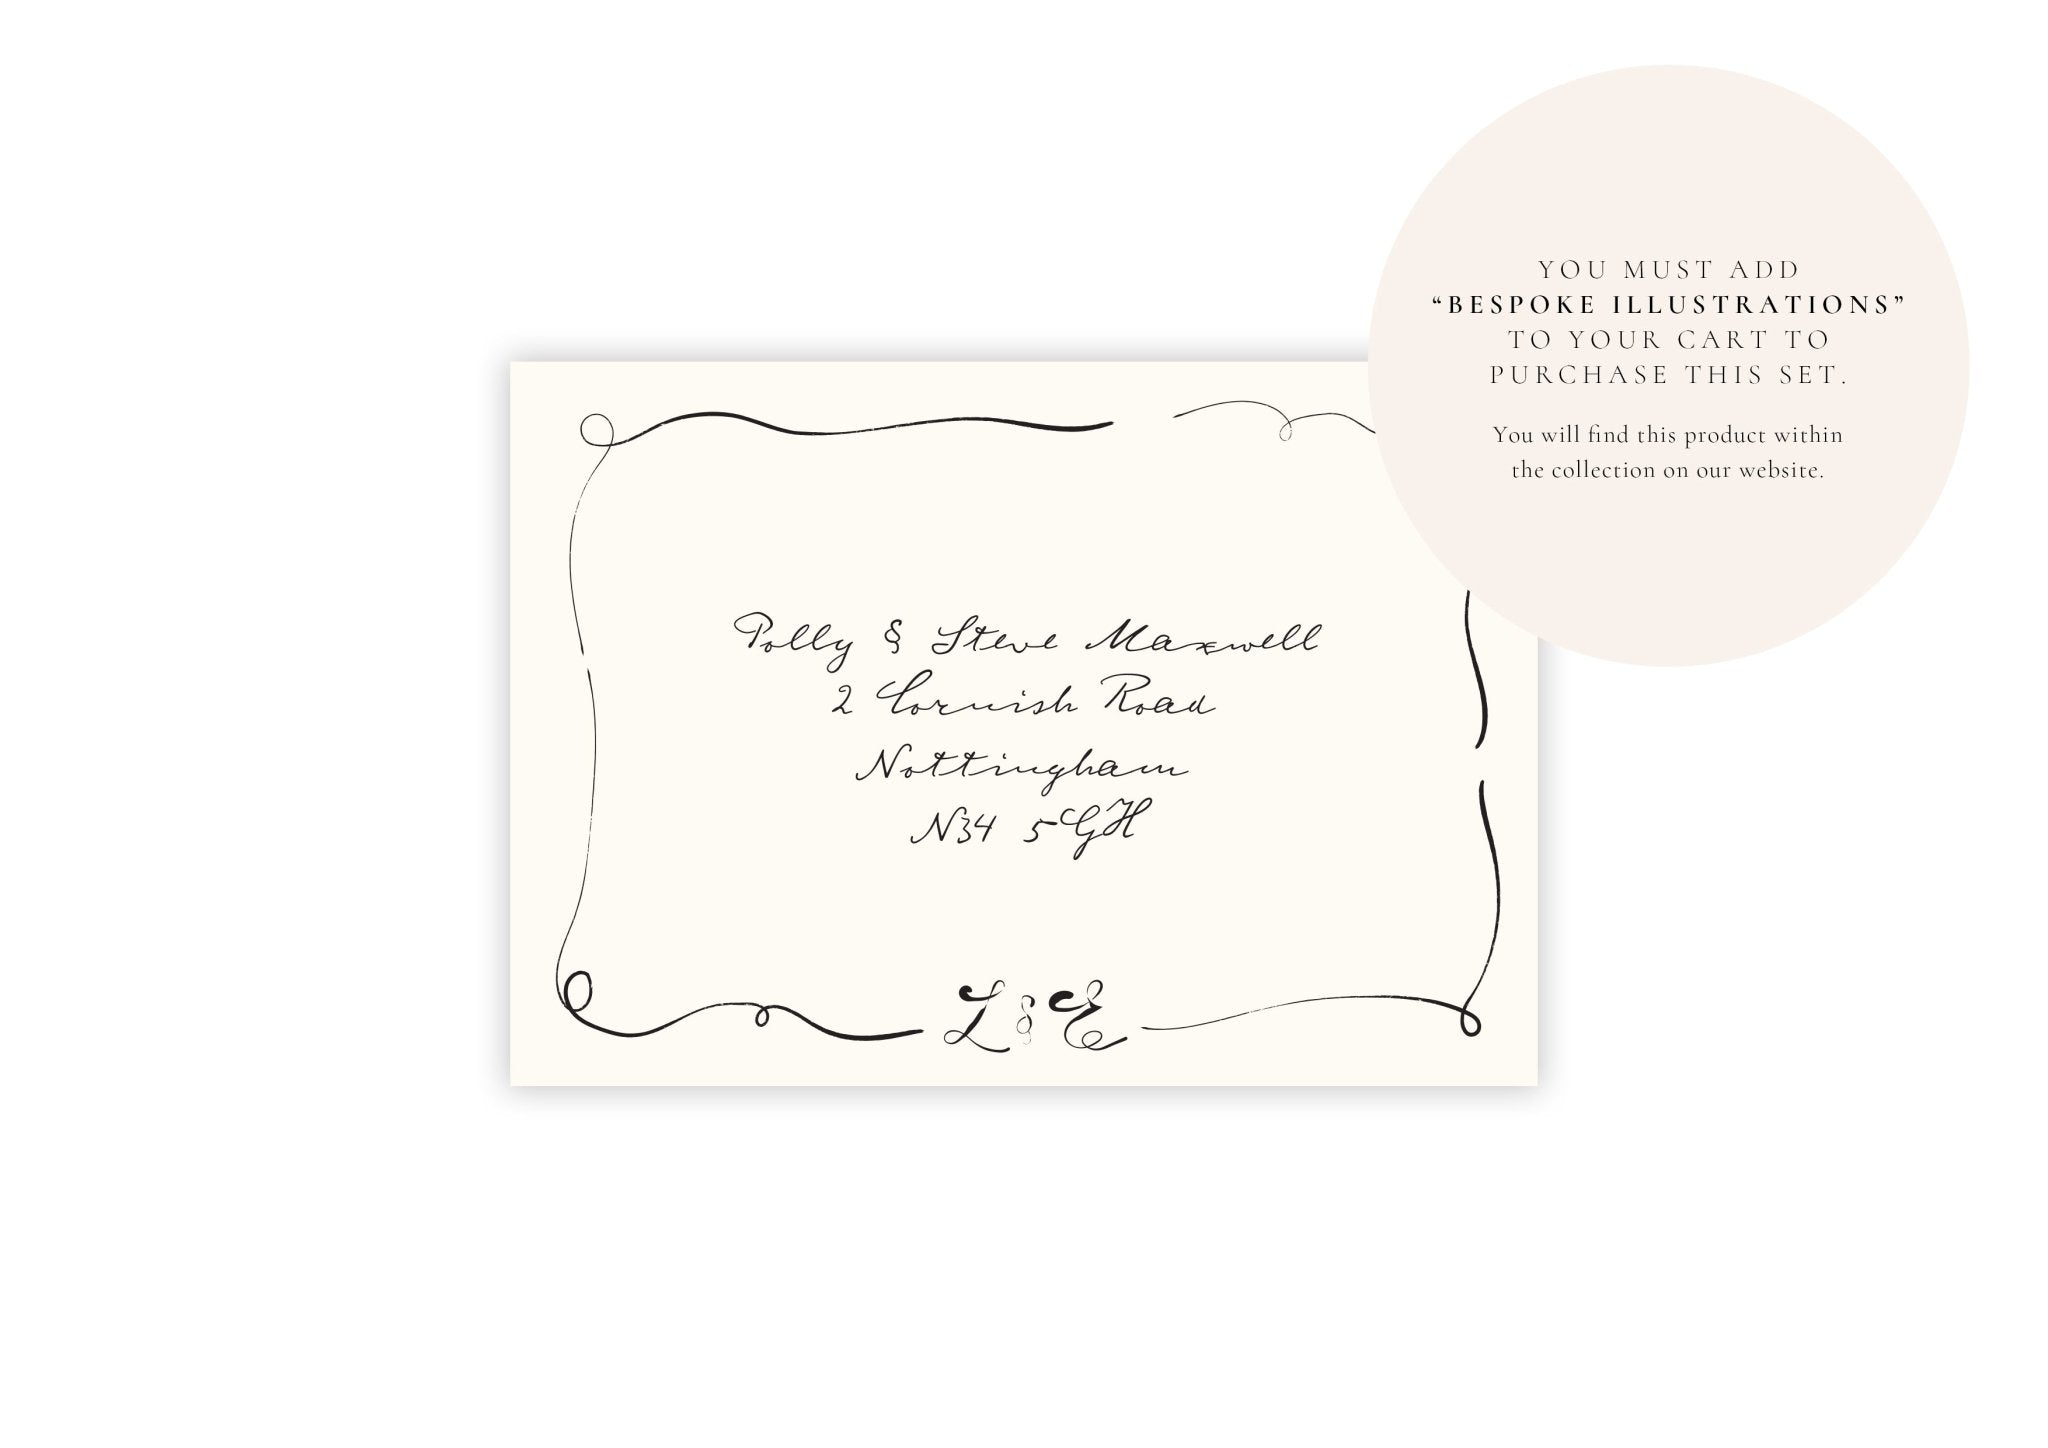 Parisian Lovers - Personalised Save The Date Envelope - Ten Story Stationery